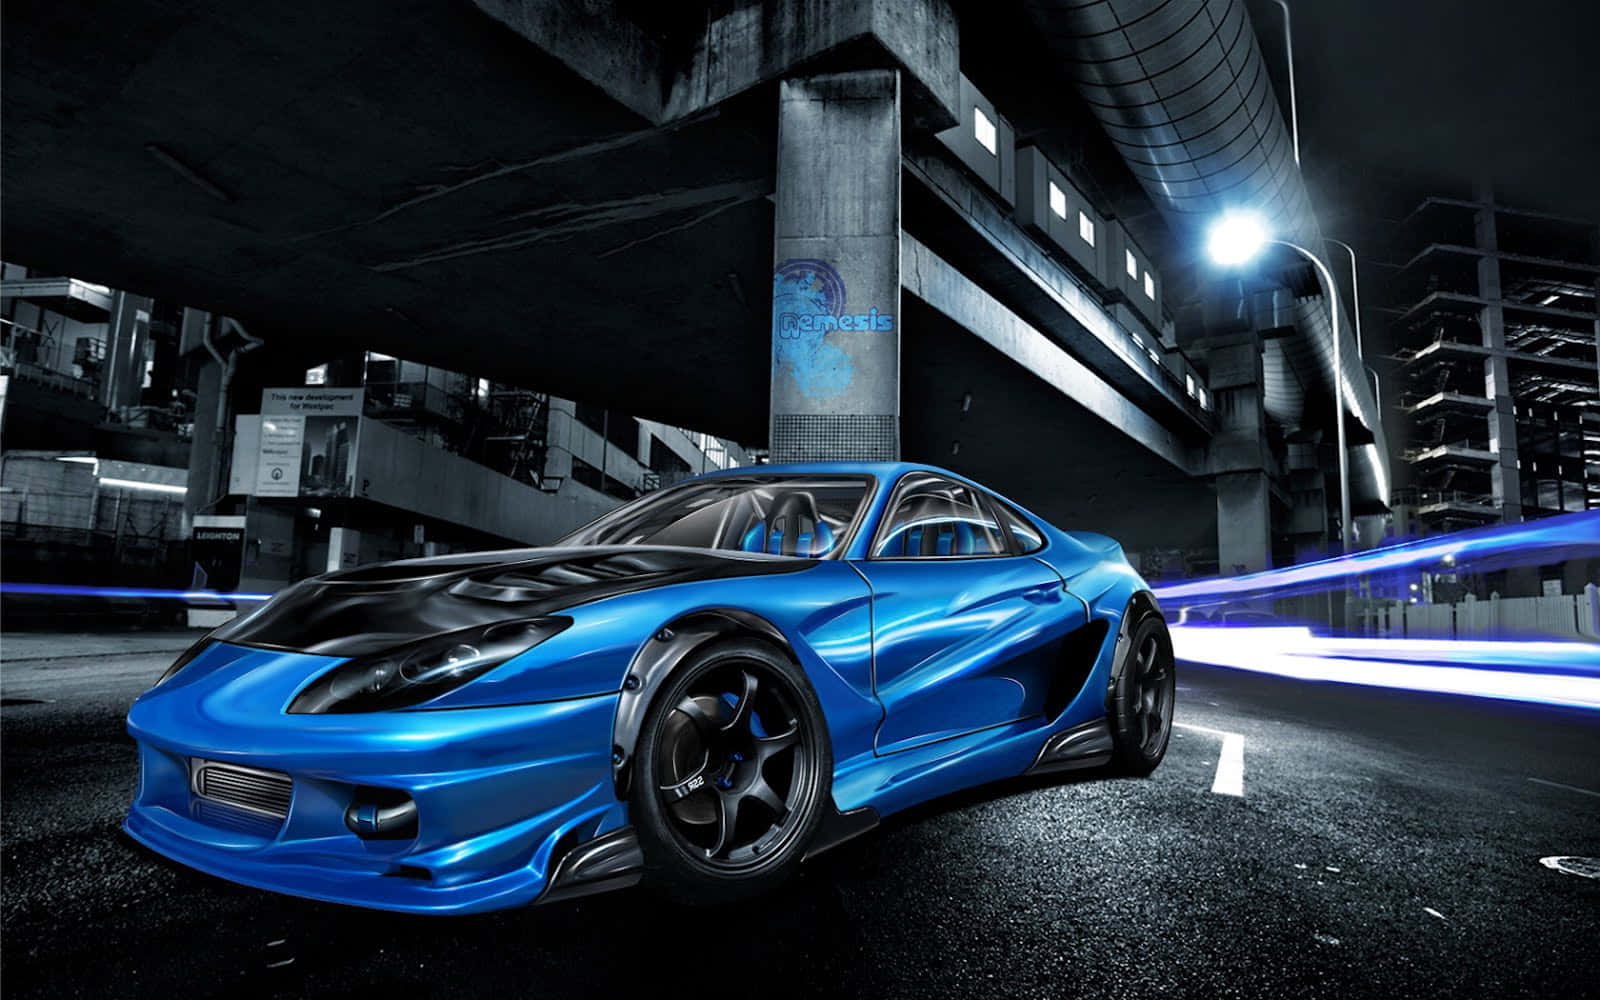 Supercharged Anime Car Roars into the Night